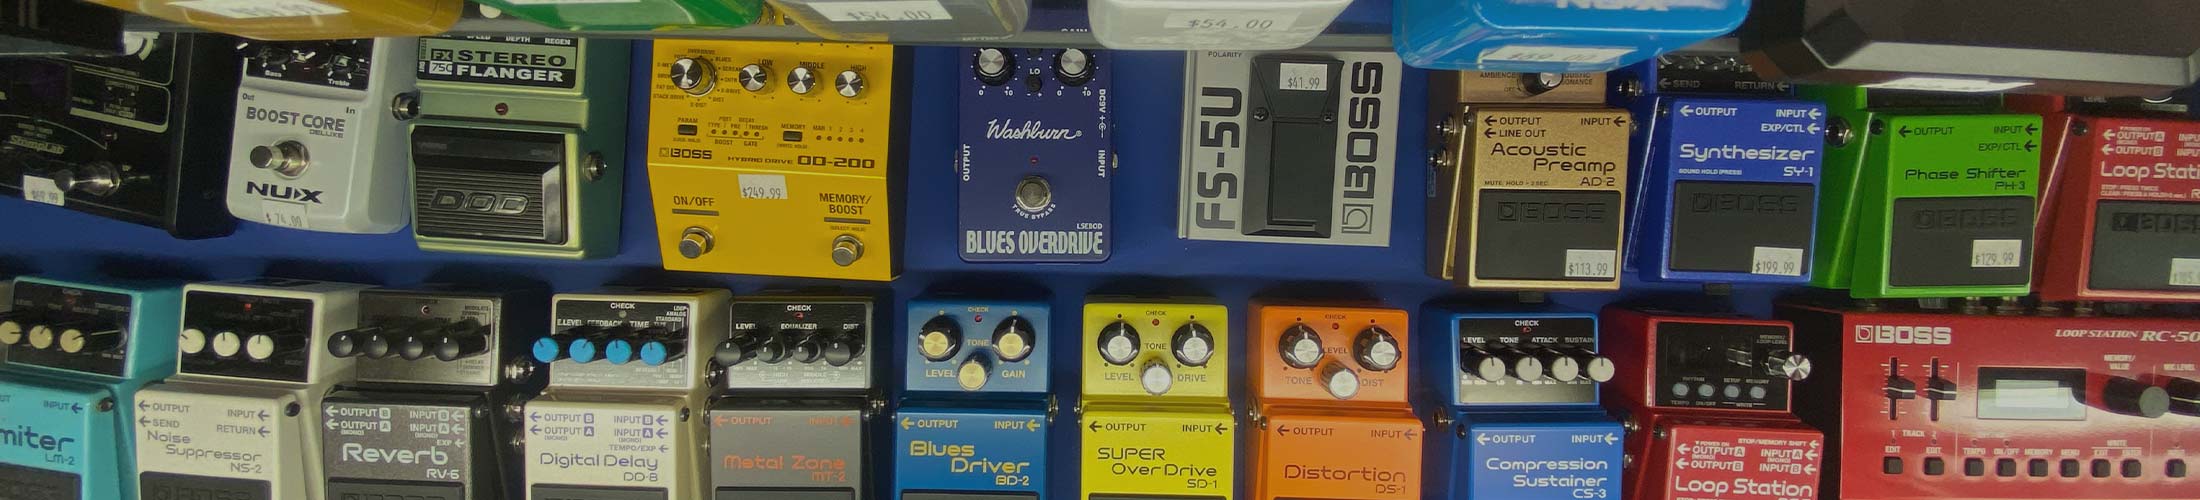 image of effects pedals at WestSide Music in Waipahu